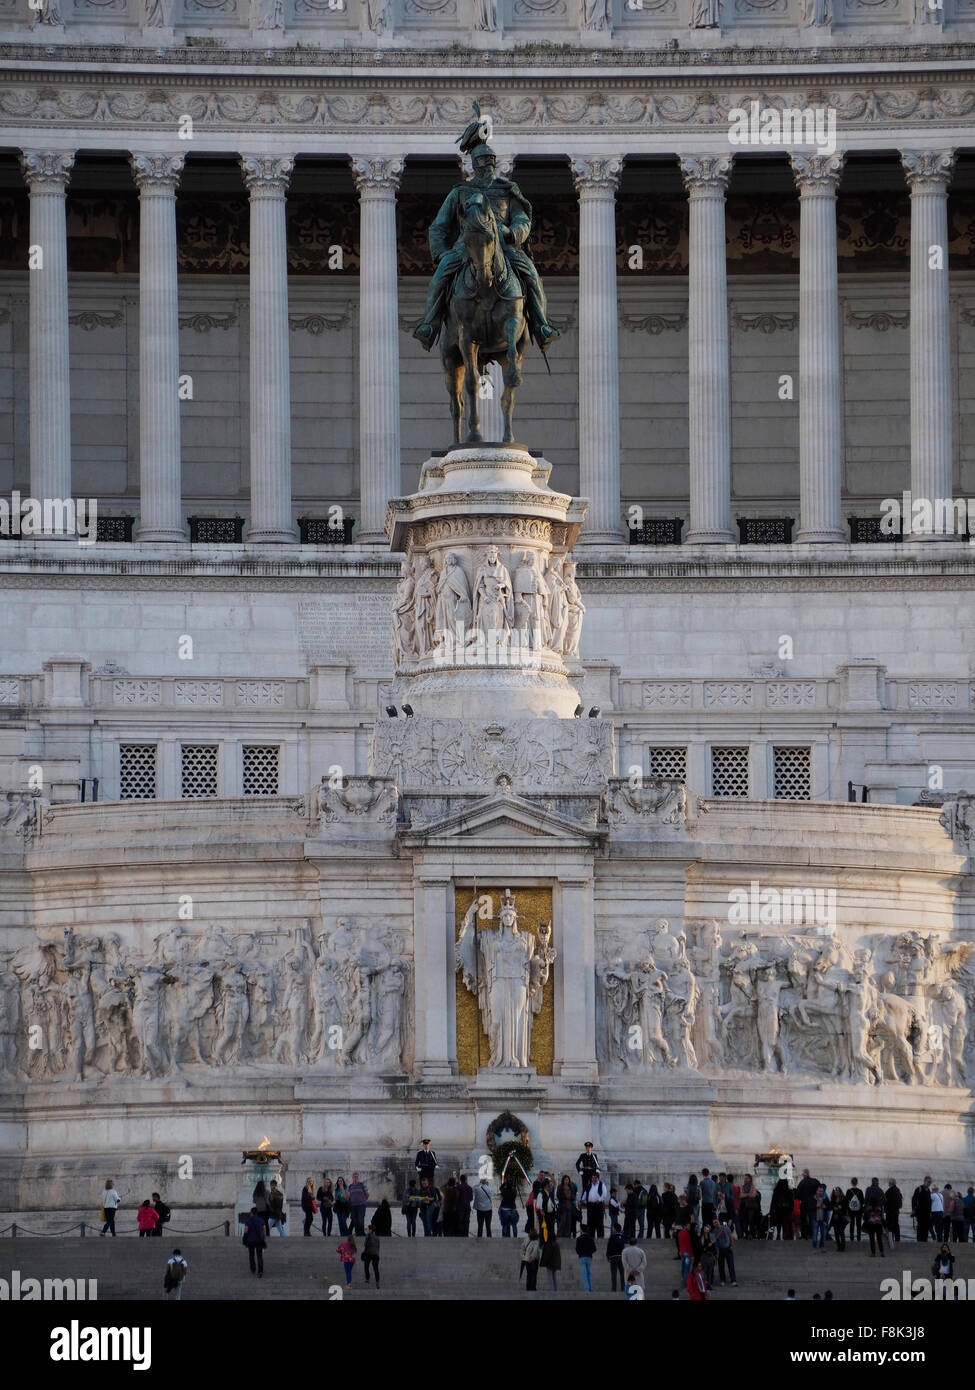 The Altar of the Nation, monument of Vittorio Emanuele II, celebrating the unification of Italy, in Rome, Italy. Stock Photo